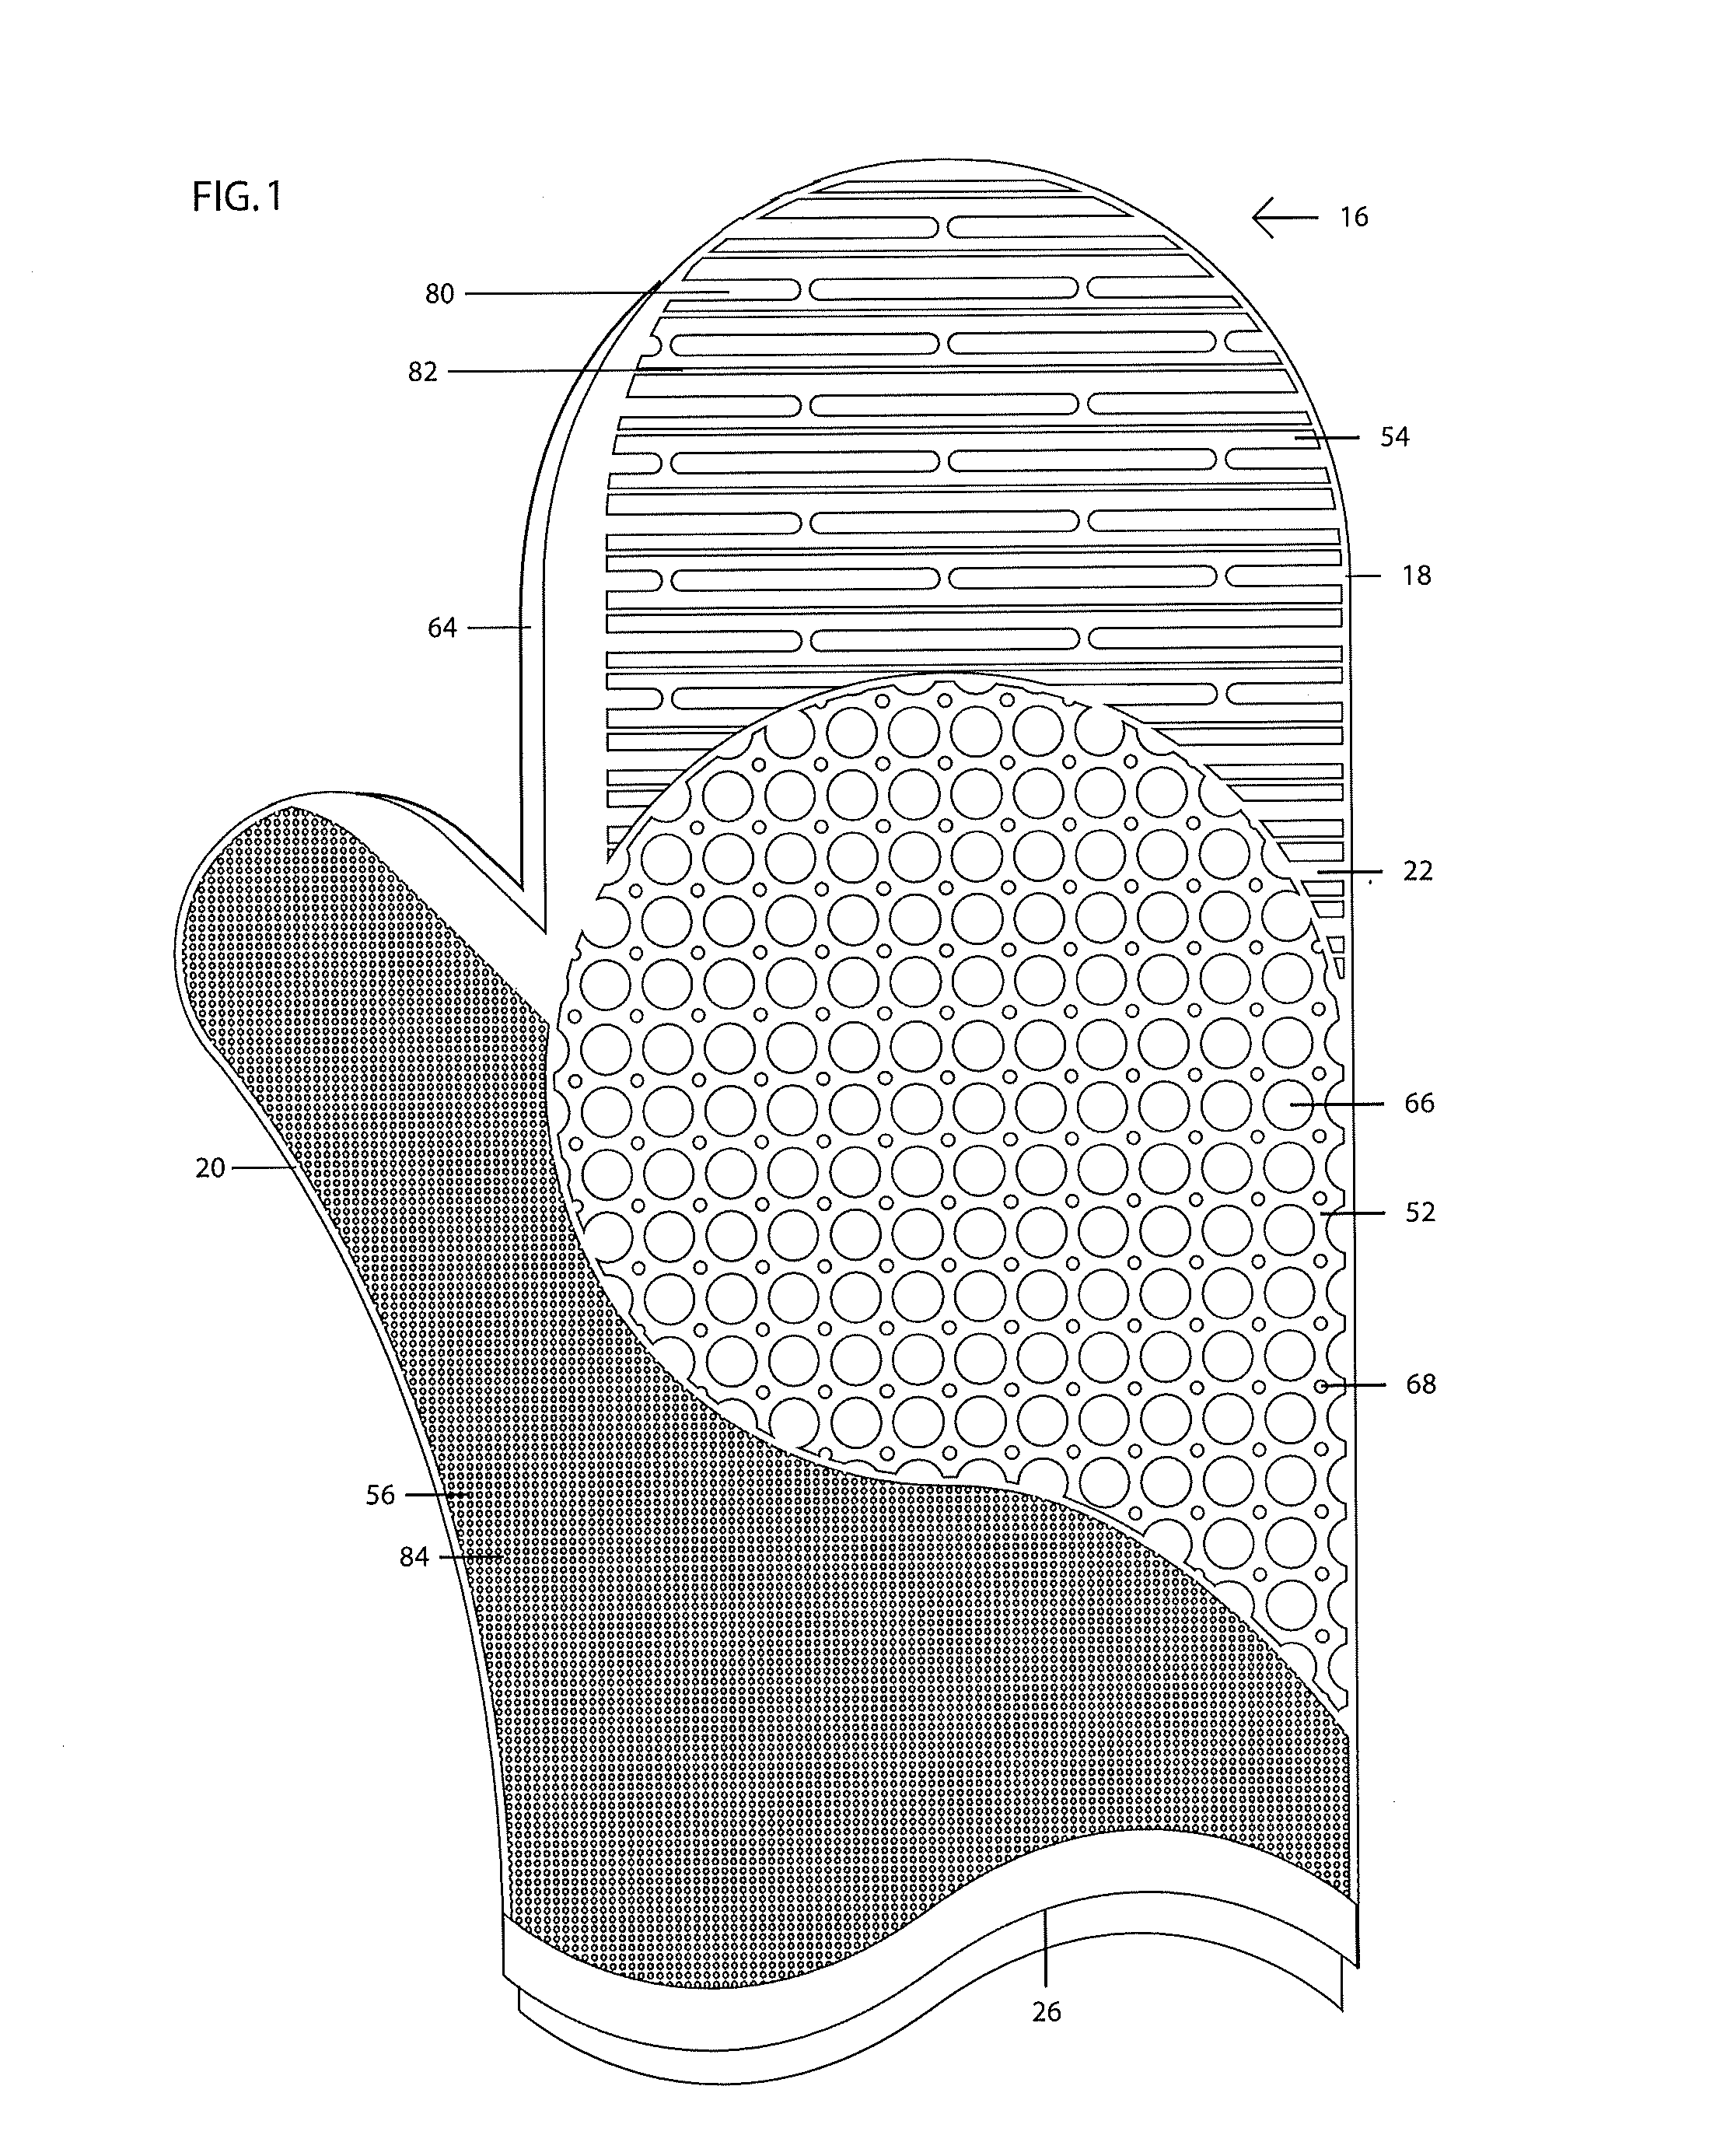 Textured device for cleaning cosmetic brushes